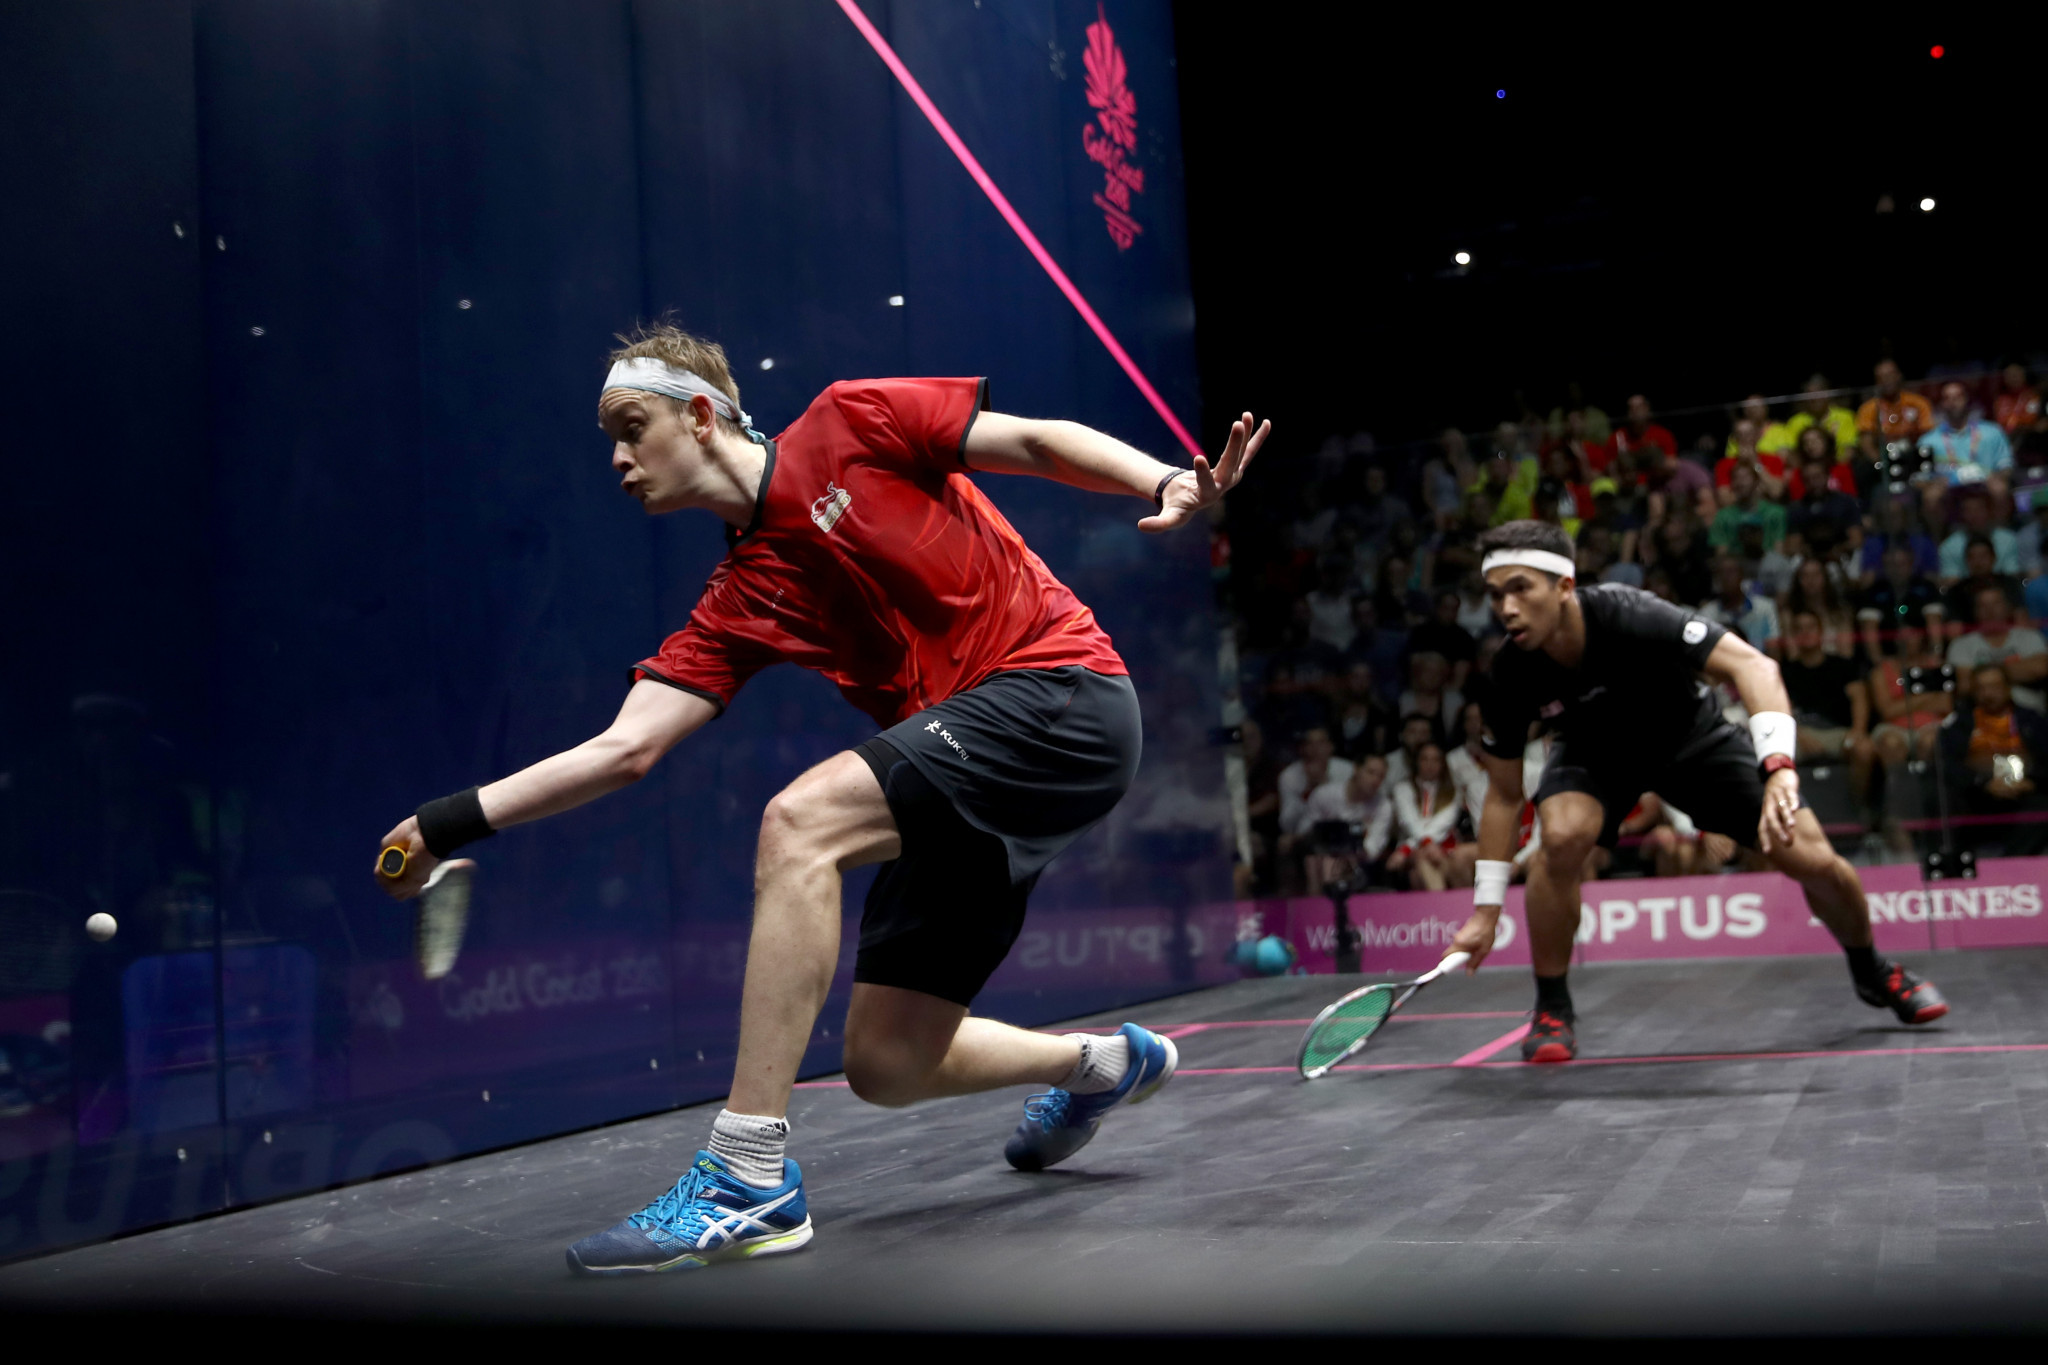 PSA highlight squash's health benefits after new data released